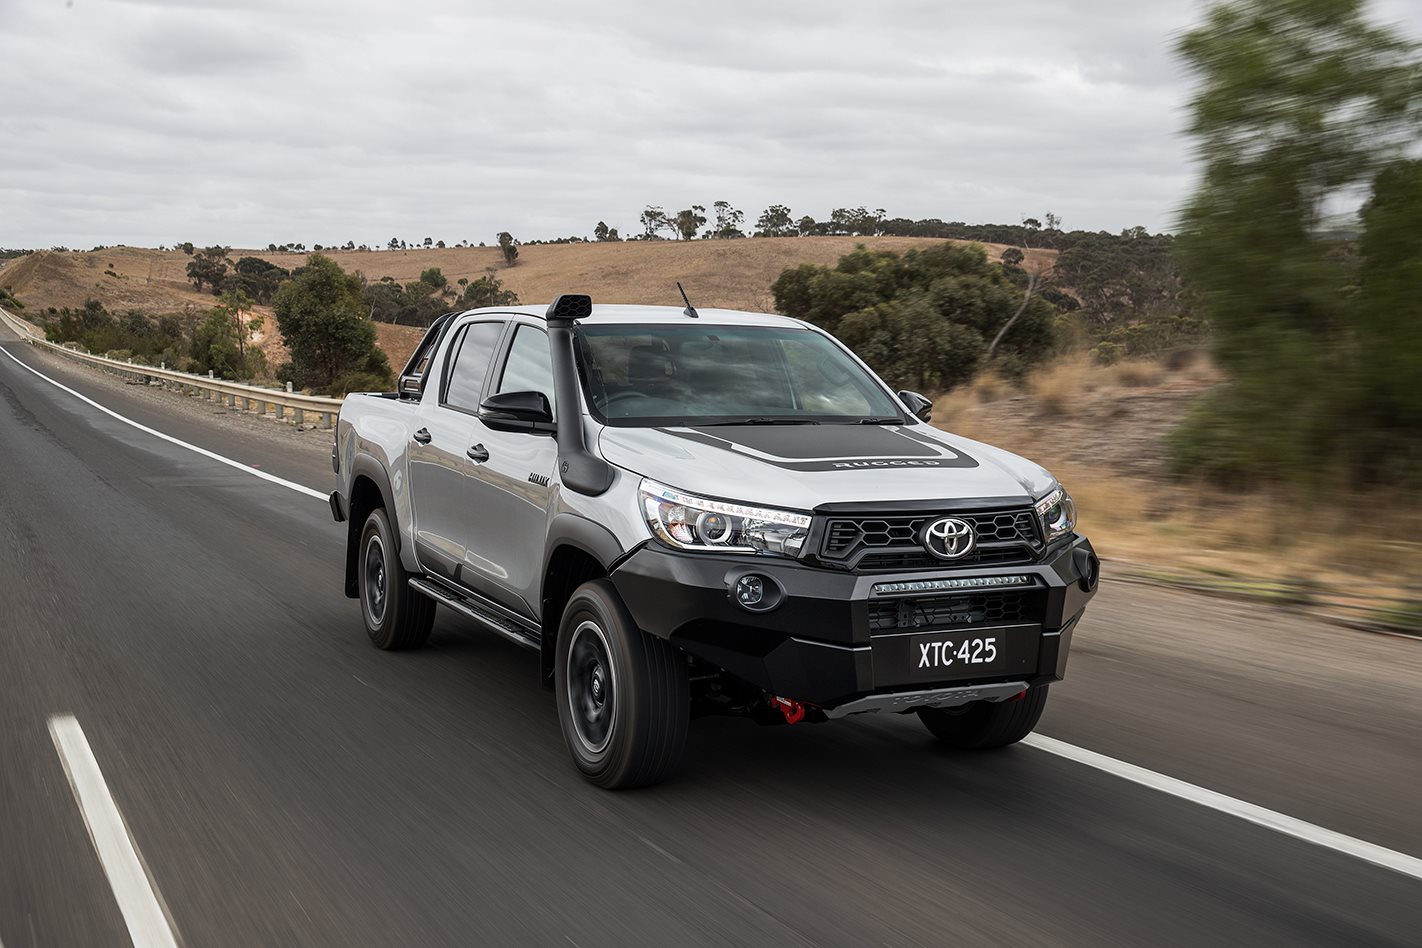 Toyota HiLux 2019 Review, Price & Features | Australia